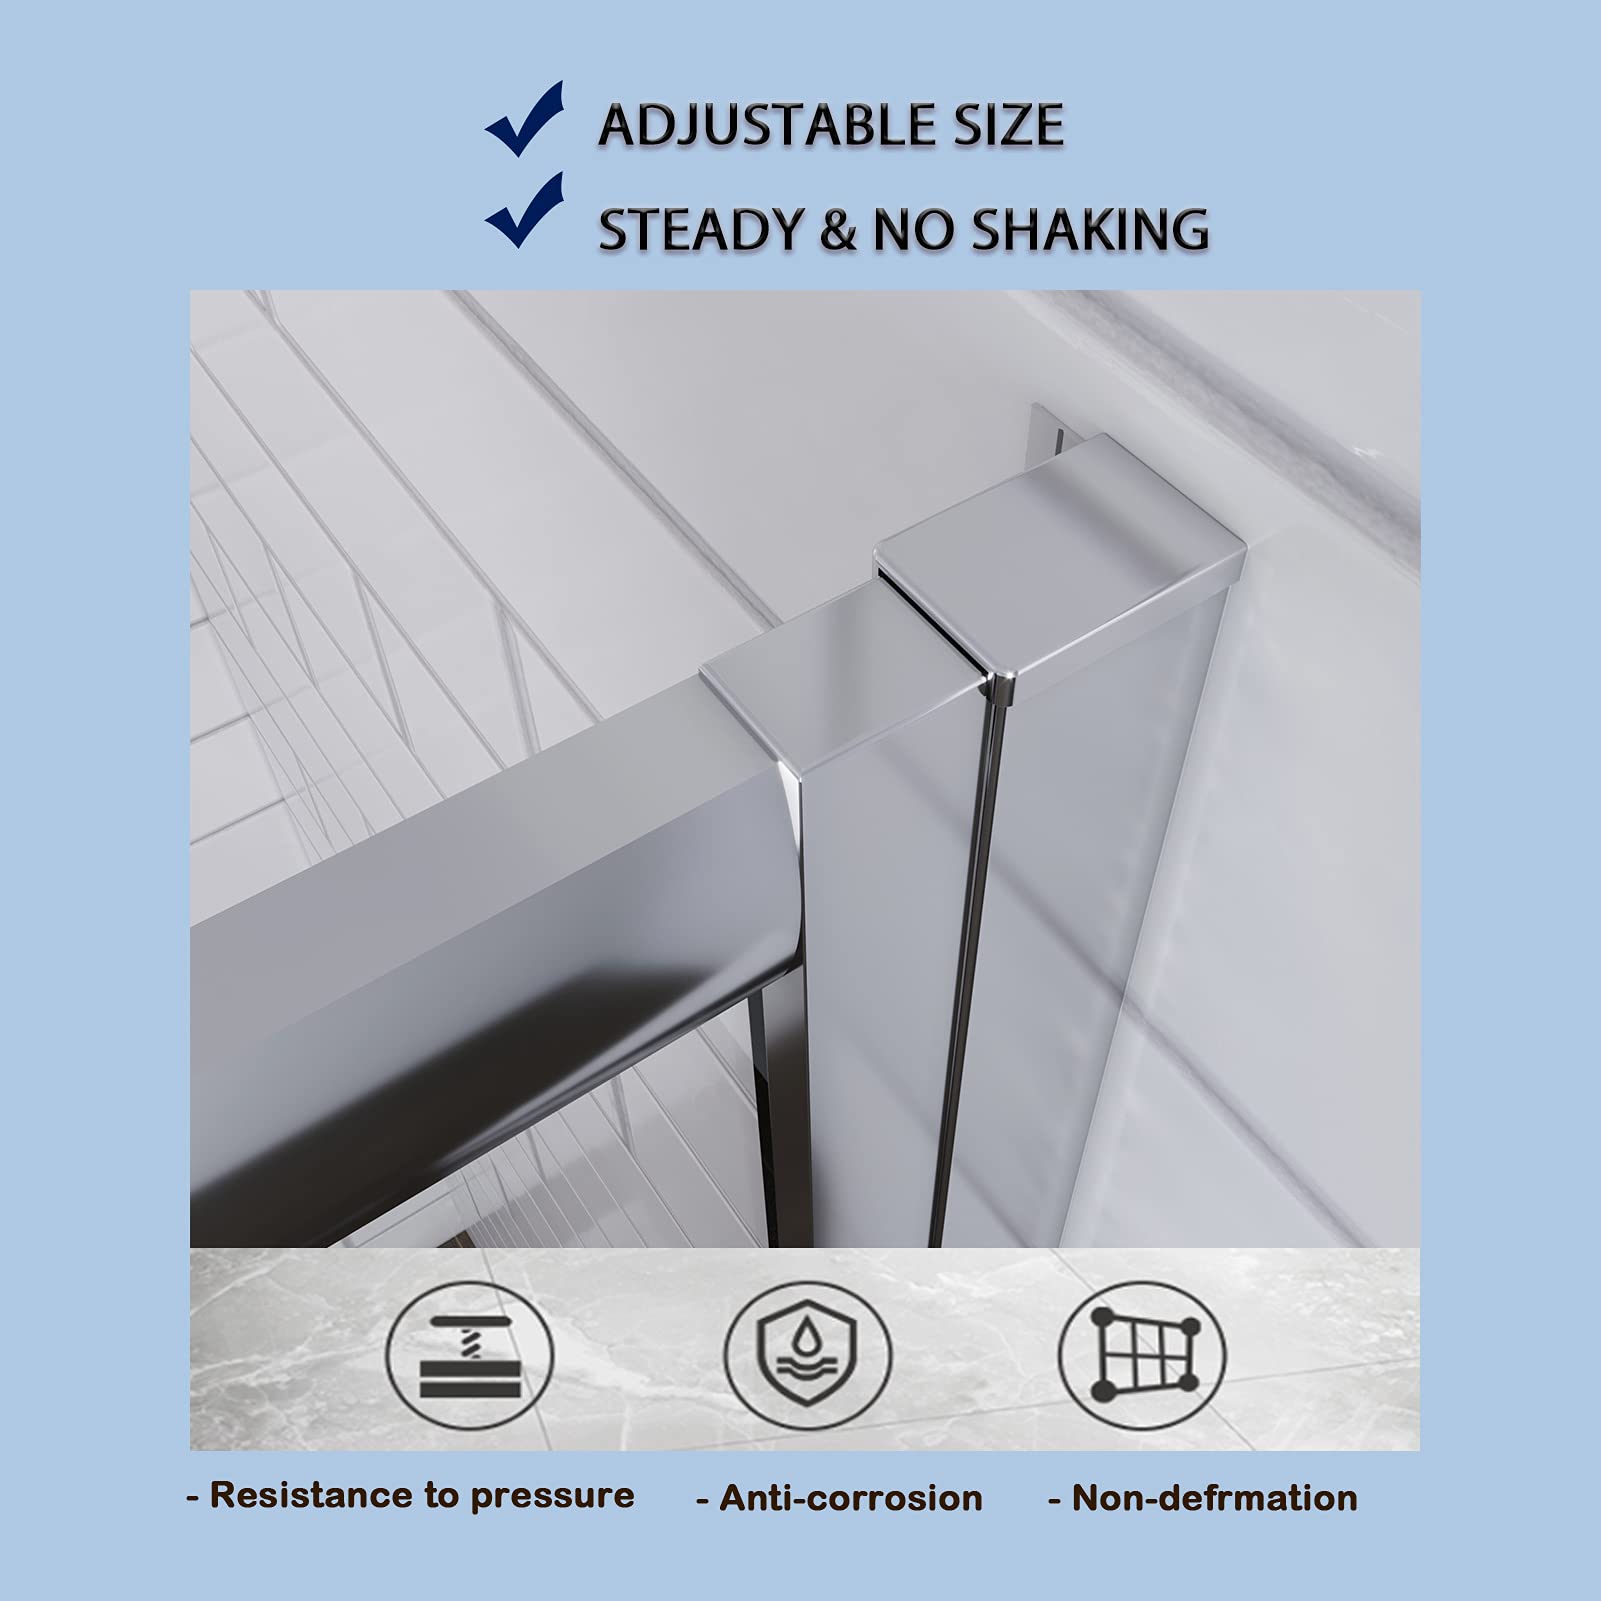 Thickened wall design, adjustable width mode, better fit for your shower doors. Anti-corrosion & Non-defrmation.